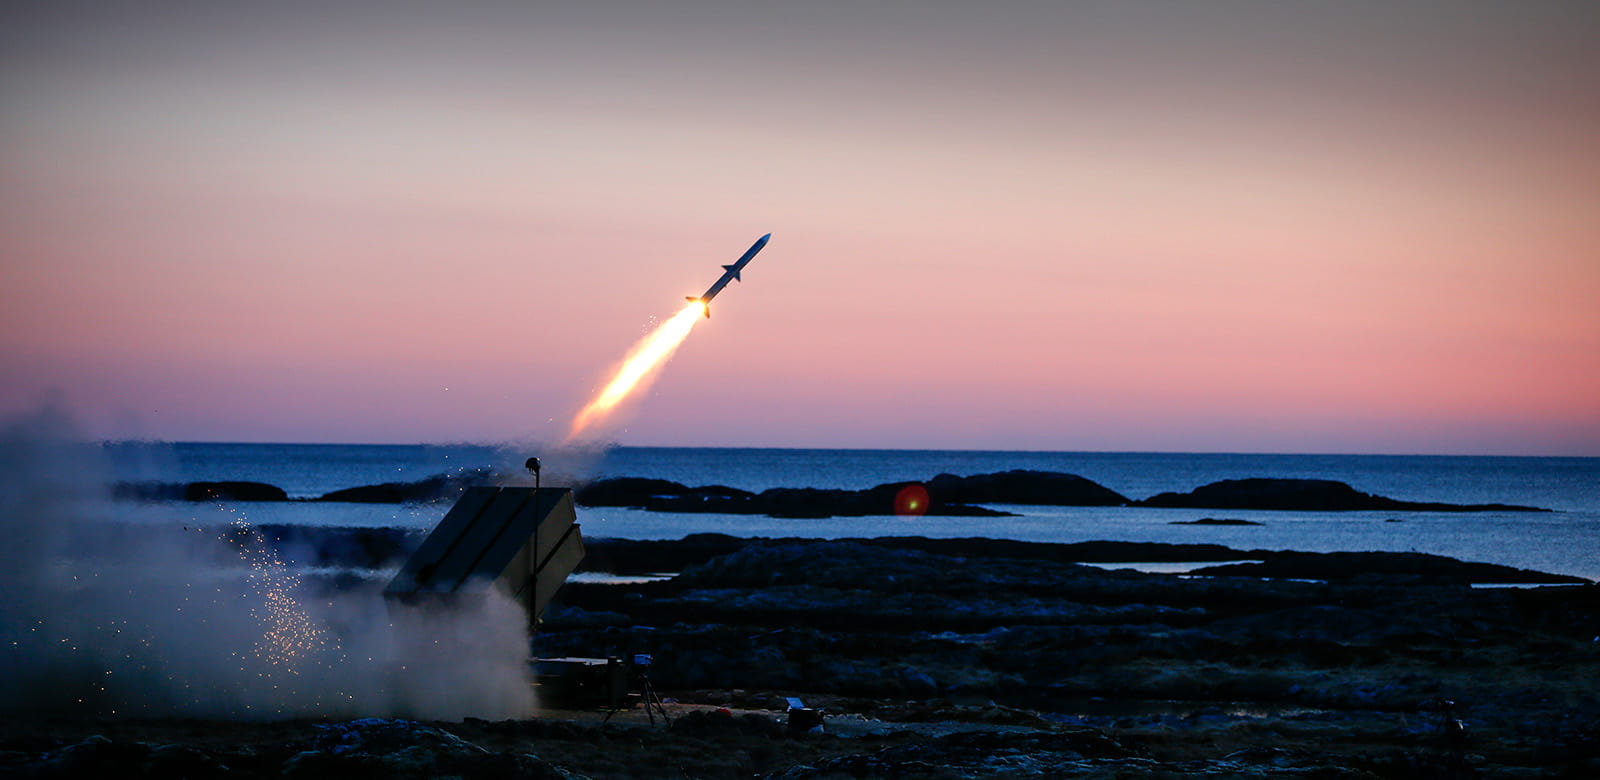 The NASAMS system, a collaboration between Kongsberg Defence & Aerospace and Raytheon Missiles & Defense, is used in support of critical air defense to protect the U.S. national capital.